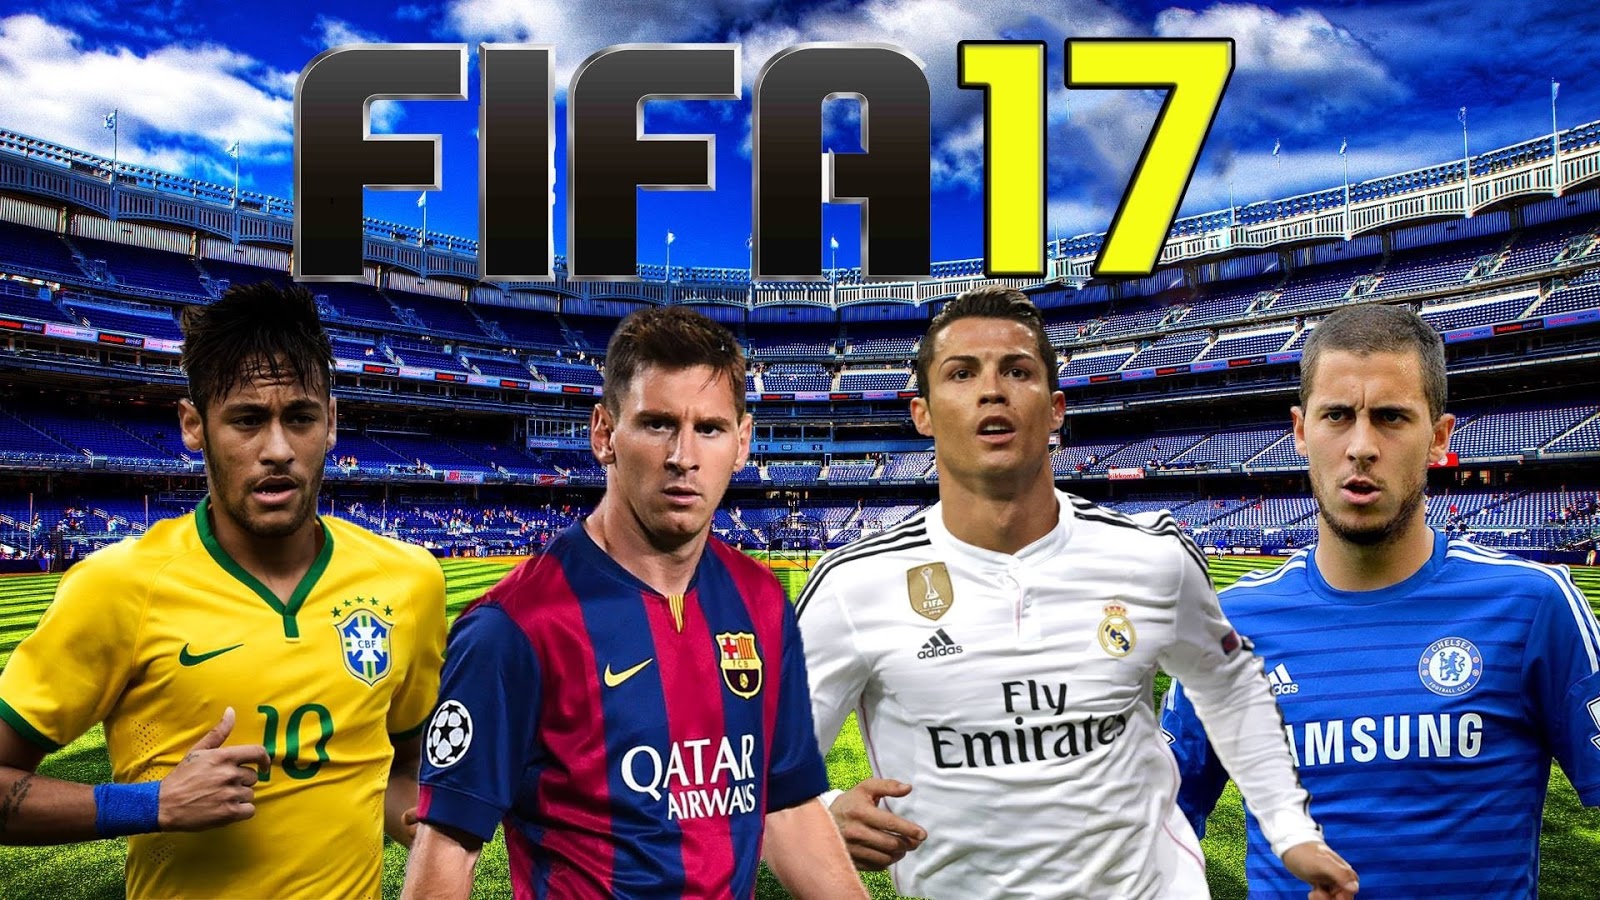 Fifa 17 PC Game Download Full Version - Just 4 Techniques